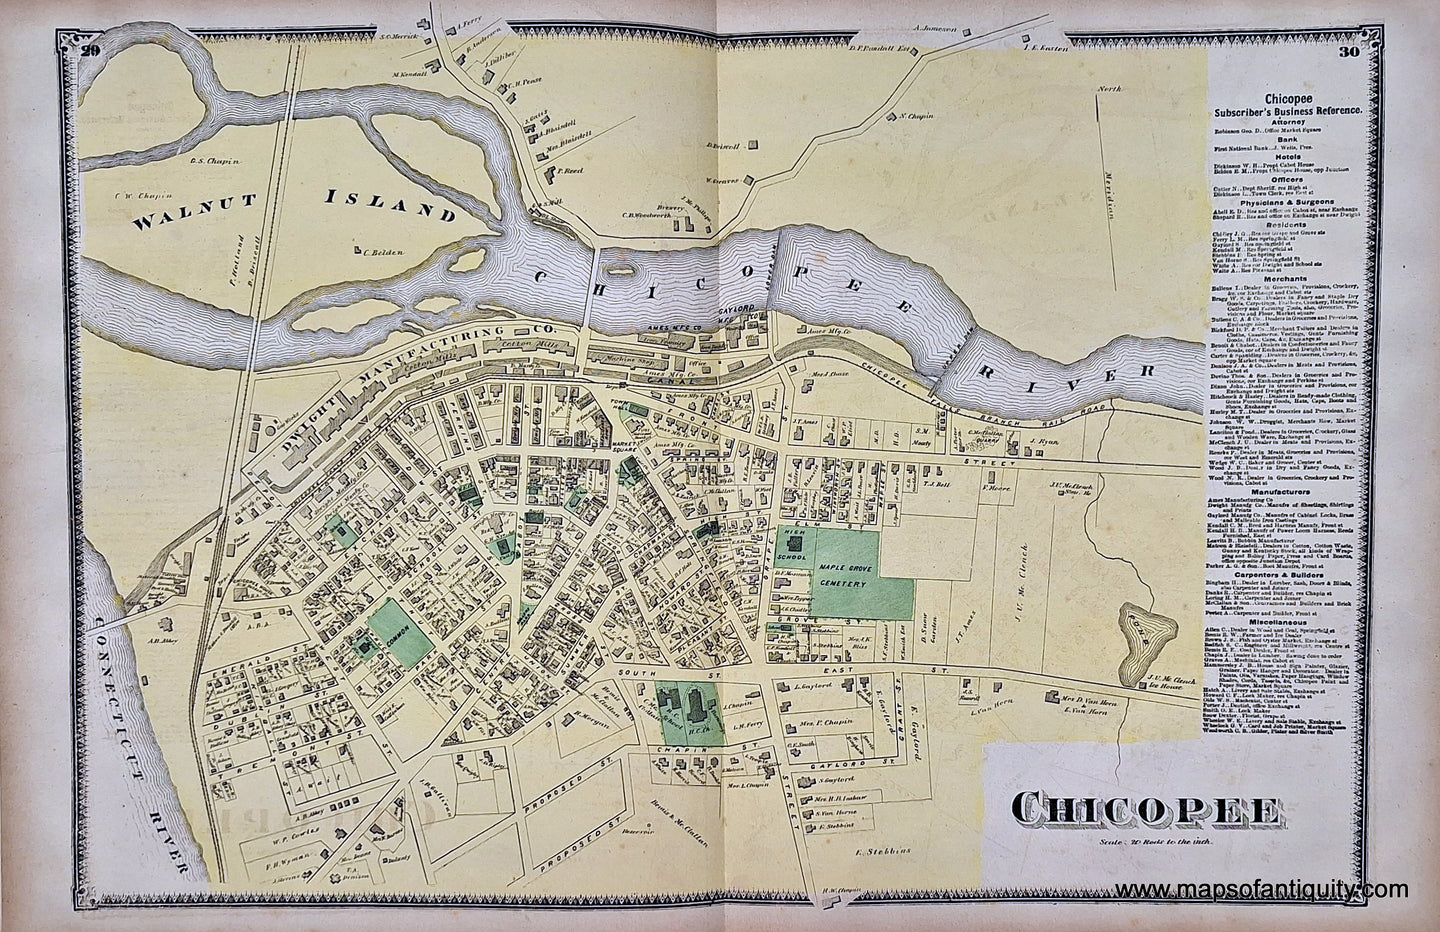 Antique-Hand-Colored-Map-Chicopee-pp.-29-30-(MA)-Massachusetts-Hampden-County-1870-Beers-Ellis-and-Soule-Maps-Of-Antiquity